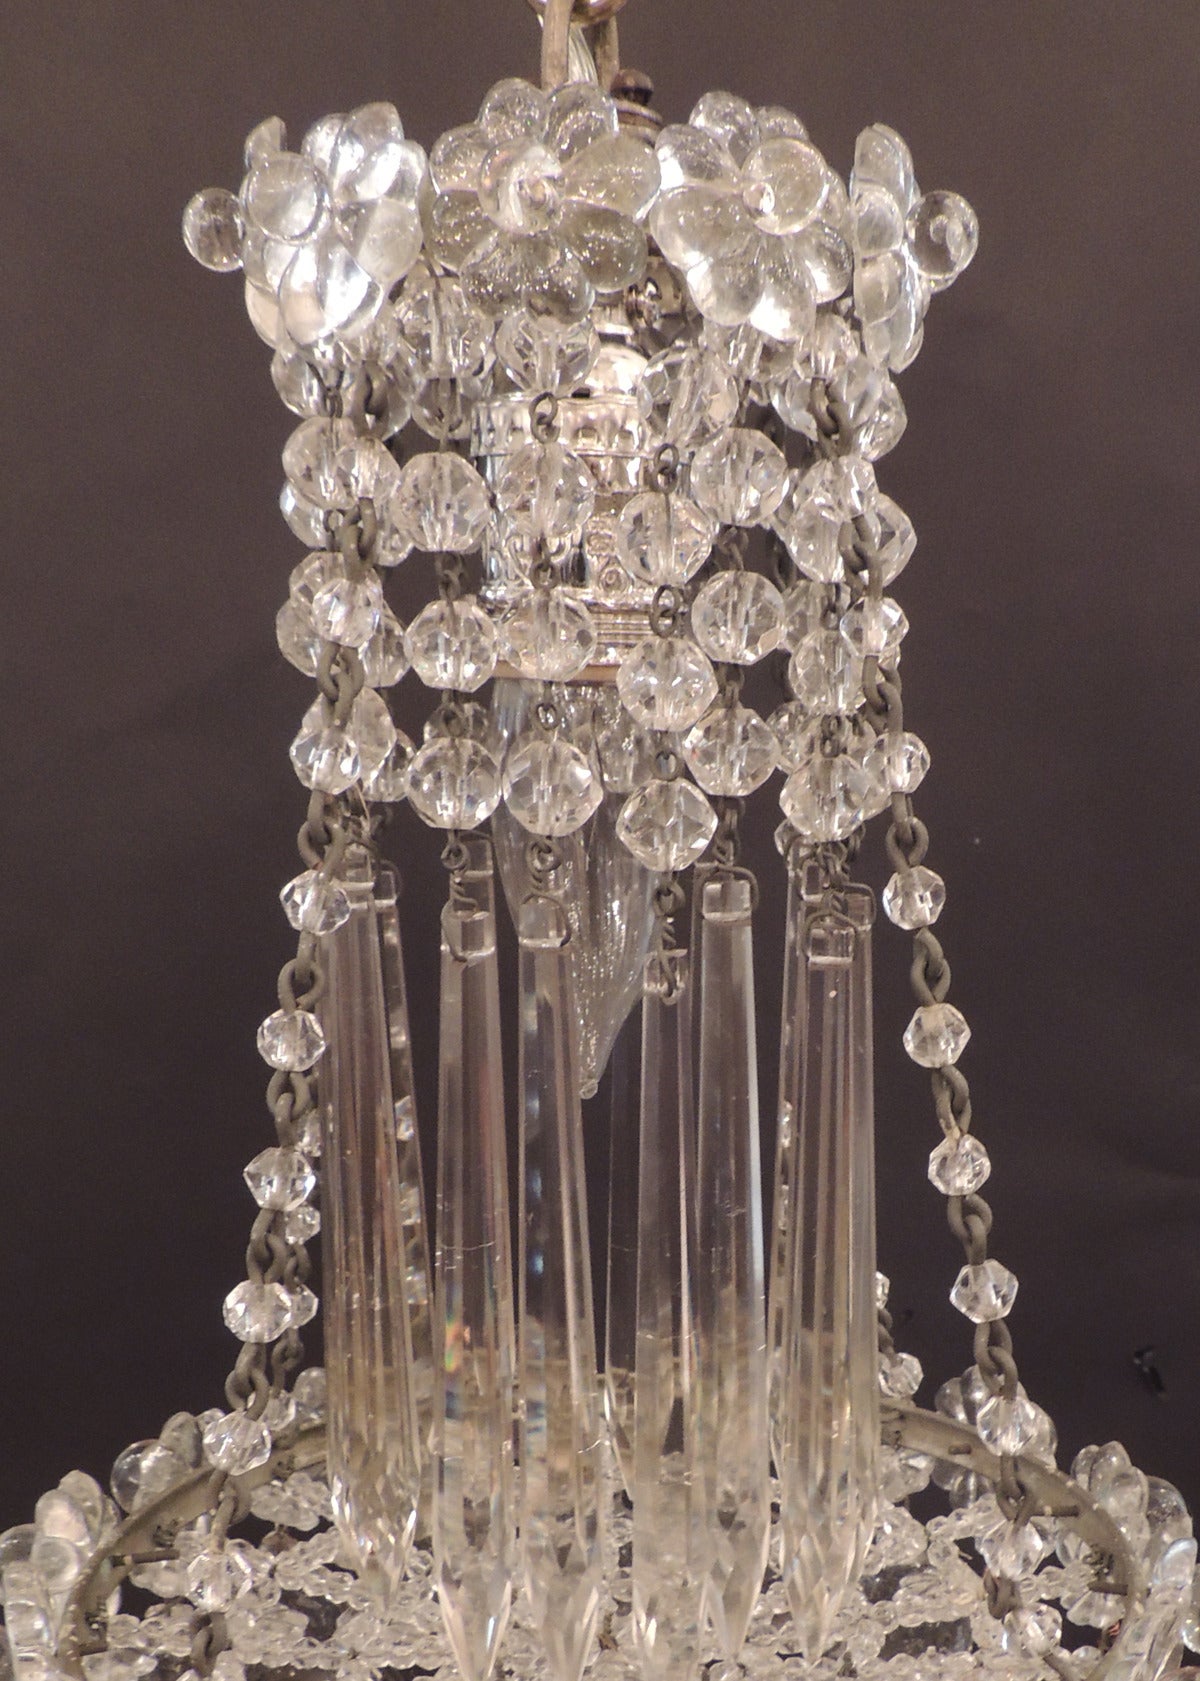 This chandelier was made in the early-20th century, circa 1900. This piece features crystal rosettes at the top with hanging prisms covering the body of the piece. The base of the chandelier is a waterfall shape with Venetian crystal balls. The